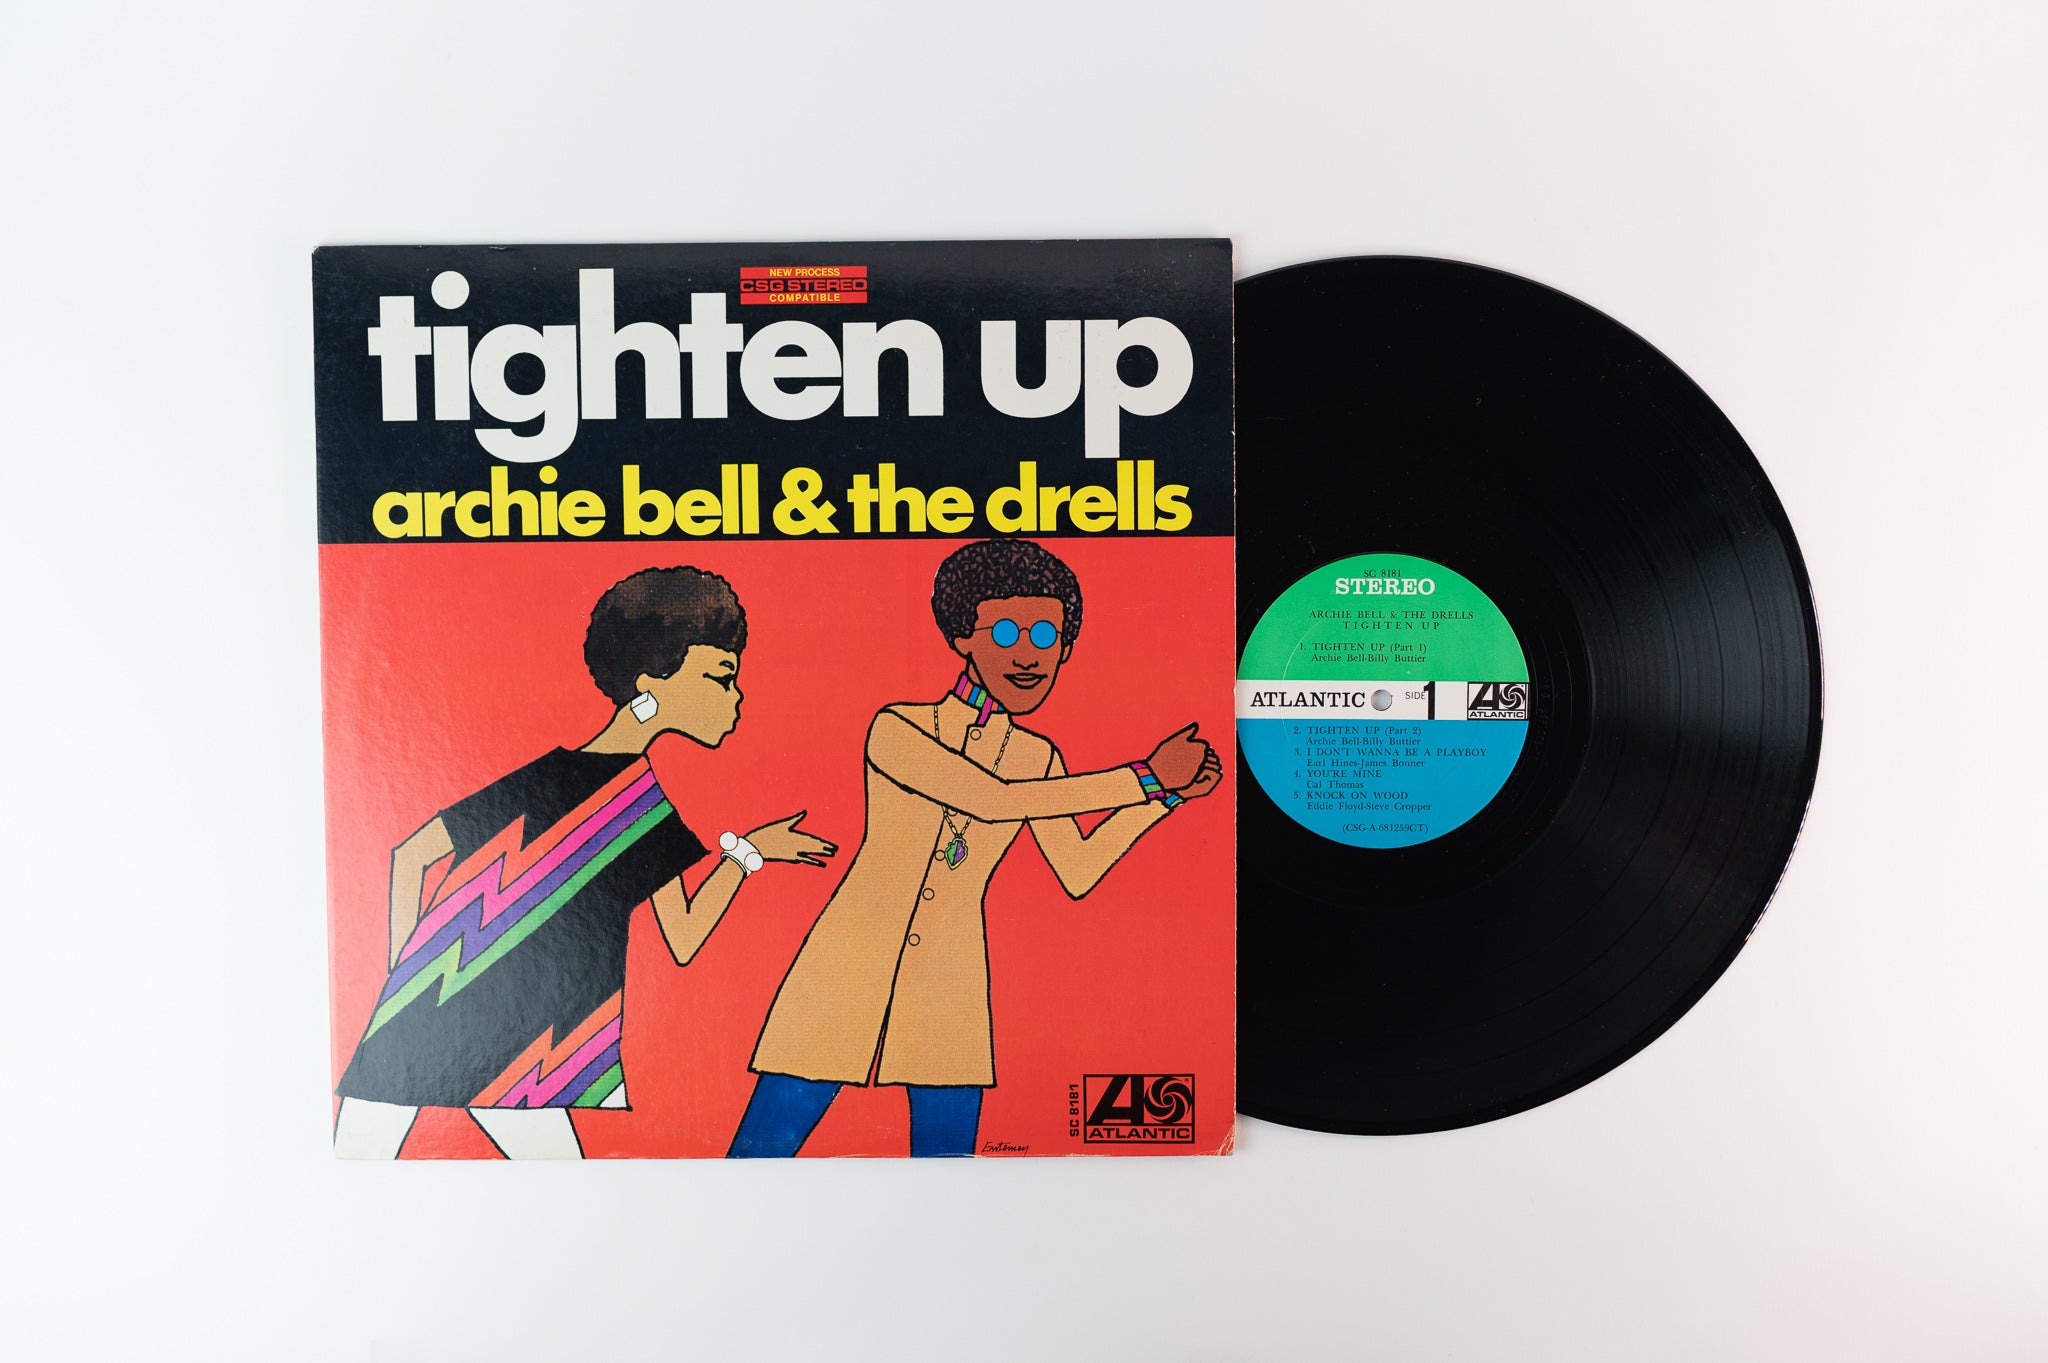 Archie Bell & The Drells - Tighten Up on Atlantic Stereo